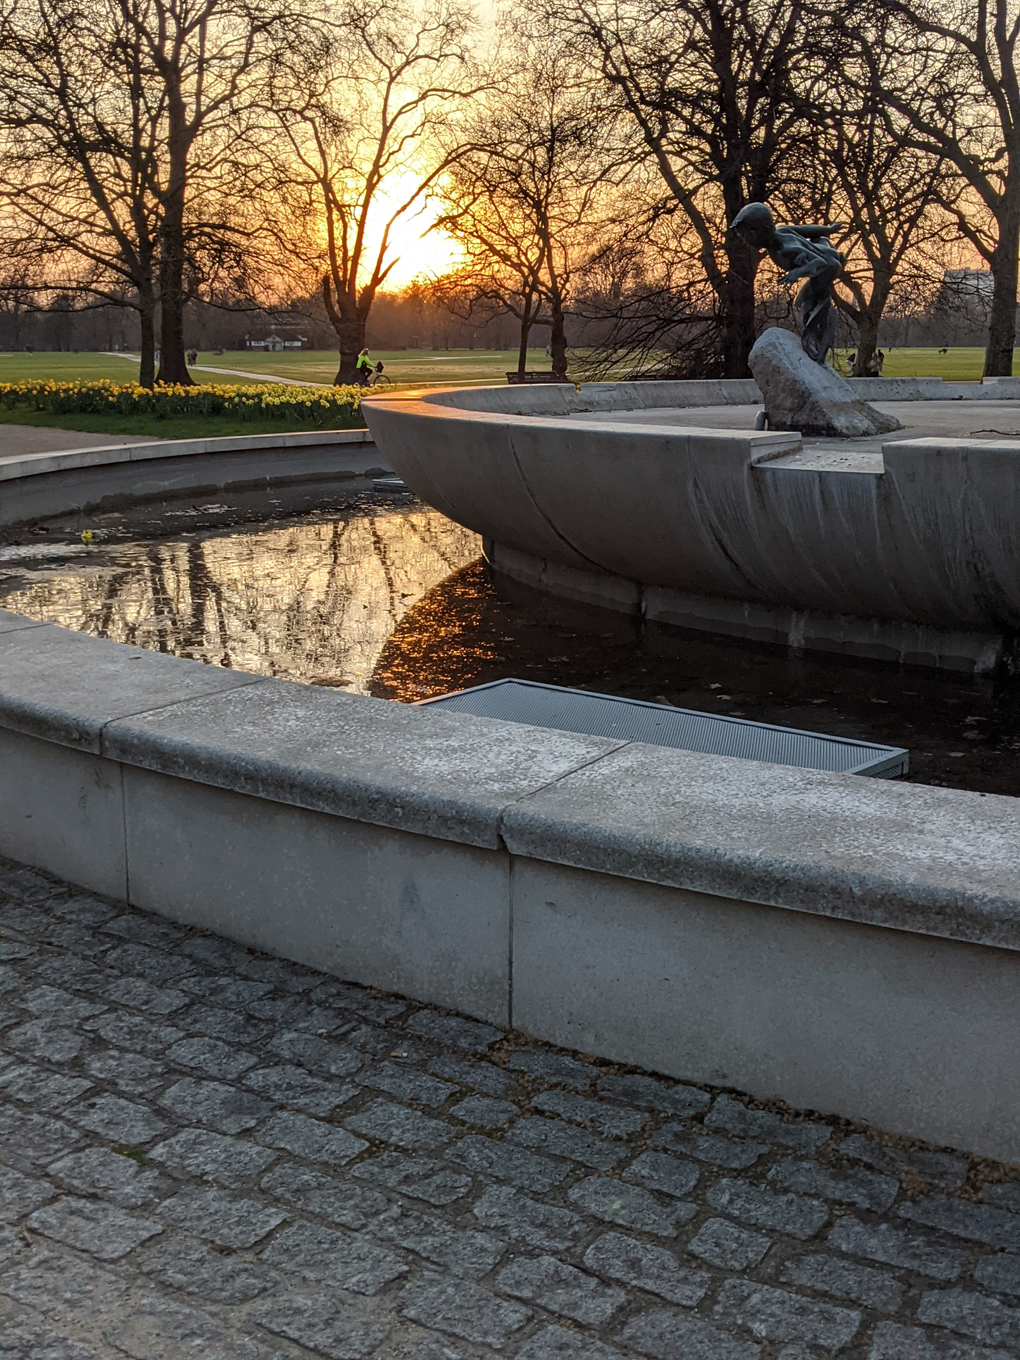 Sunset over a fountain at golden hour